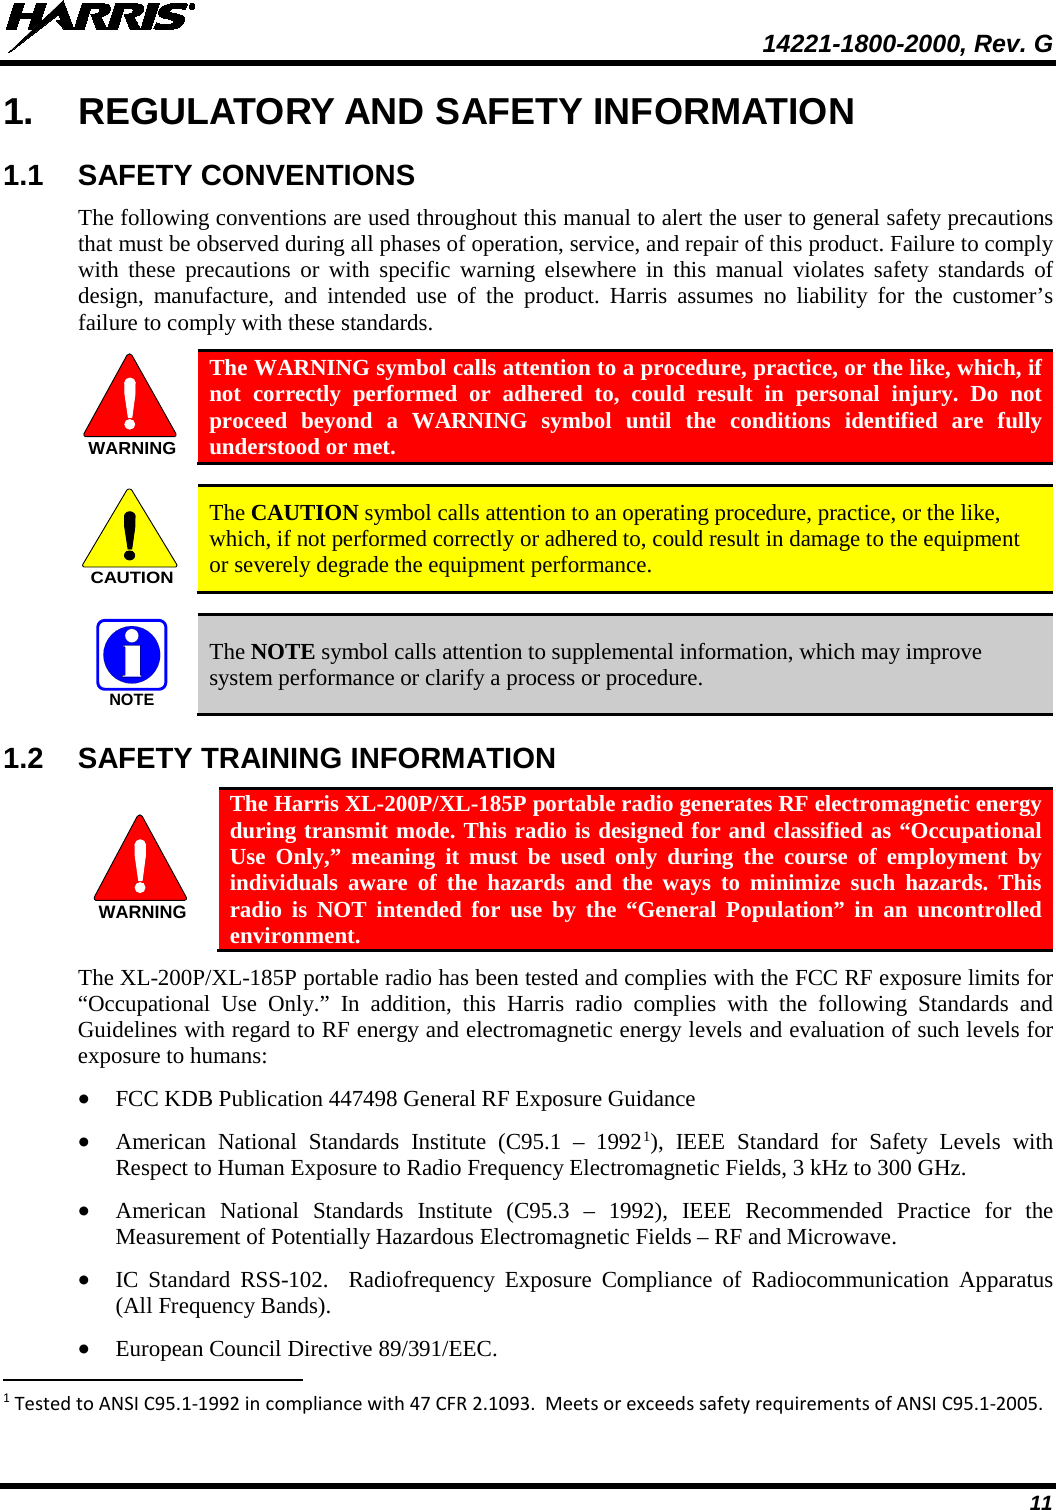  14221-1800-2000, Rev. G 11 1. REGULATORY AND SAFETY INFORMATION 1.1 SAFETY CONVENTIONS The following conventions are used throughout this manual to alert the user to general safety precautions that must be observed during all phases of operation, service, and repair of this product. Failure to comply with these precautions or with specific warning elsewhere in this manual violates safety standards of design, manufacture, and intended use of the product. Harris assumes no liability for the customer’s failure to comply with these standards.  The WARNING symbol calls attention to a procedure, practice, or the like, which, if not correctly performed or adhered to, could result in personal injury. Do not proceed beyond a WARNING symbol until the conditions identified are fully understood or met.     The CAUTION symbol calls attention to an operating procedure, practice, or the like, which, if not performed correctly or adhered to, could result in damage to the equipment or severely degrade the equipment performance.     The NOTE symbol calls attention to supplemental information, which may improve system performance or clarify a process or procedure. 1.2 SAFETY TRAINING INFORMATION  The Harris XL-200P/XL-185P portable radio generates RF electromagnetic energy during transmit mode. This radio is designed for and classified as “Occupational Use Only,” meaning it must be used only during the course of employment by individuals aware of the hazards and the ways to minimize such hazards. This radio is NOT intended for use by the “General Population” in an uncontrolled environment. The XL-200P/XL-185P portable radio has been tested and complies with the FCC RF exposure limits for “Occupational Use Only.”  In addition, this Harris radio complies with the following Standards and Guidelines with regard to RF energy and electromagnetic energy levels and evaluation of such levels for exposure to humans: • FCC KDB Publication 447498 General RF Exposure Guidance • American National Standards Institute (C95.1 –  19921), IEEE Standard for Safety Levels with Respect to Human Exposure to Radio Frequency Electromagnetic Fields, 3 kHz to 300 GHz. • American National Standards Institute (C95.3 –  1992), IEEE Recommended Practice for the Measurement of Potentially Hazardous Electromagnetic Fields – RF and Microwave. • IC Standard RSS-102.  Radiofrequency Exposure Compliance of Radiocommunication Apparatus (All Frequency Bands). • European Council Directive 89/391/EEC.                                                            1 Tested to ANSI C95.1-1992 in compliance with 47 CFR 2.1093.  Meets or exceeds safety requirements of ANSI C95.1-2005. WARNINGCAUTIONNOTEWARNING